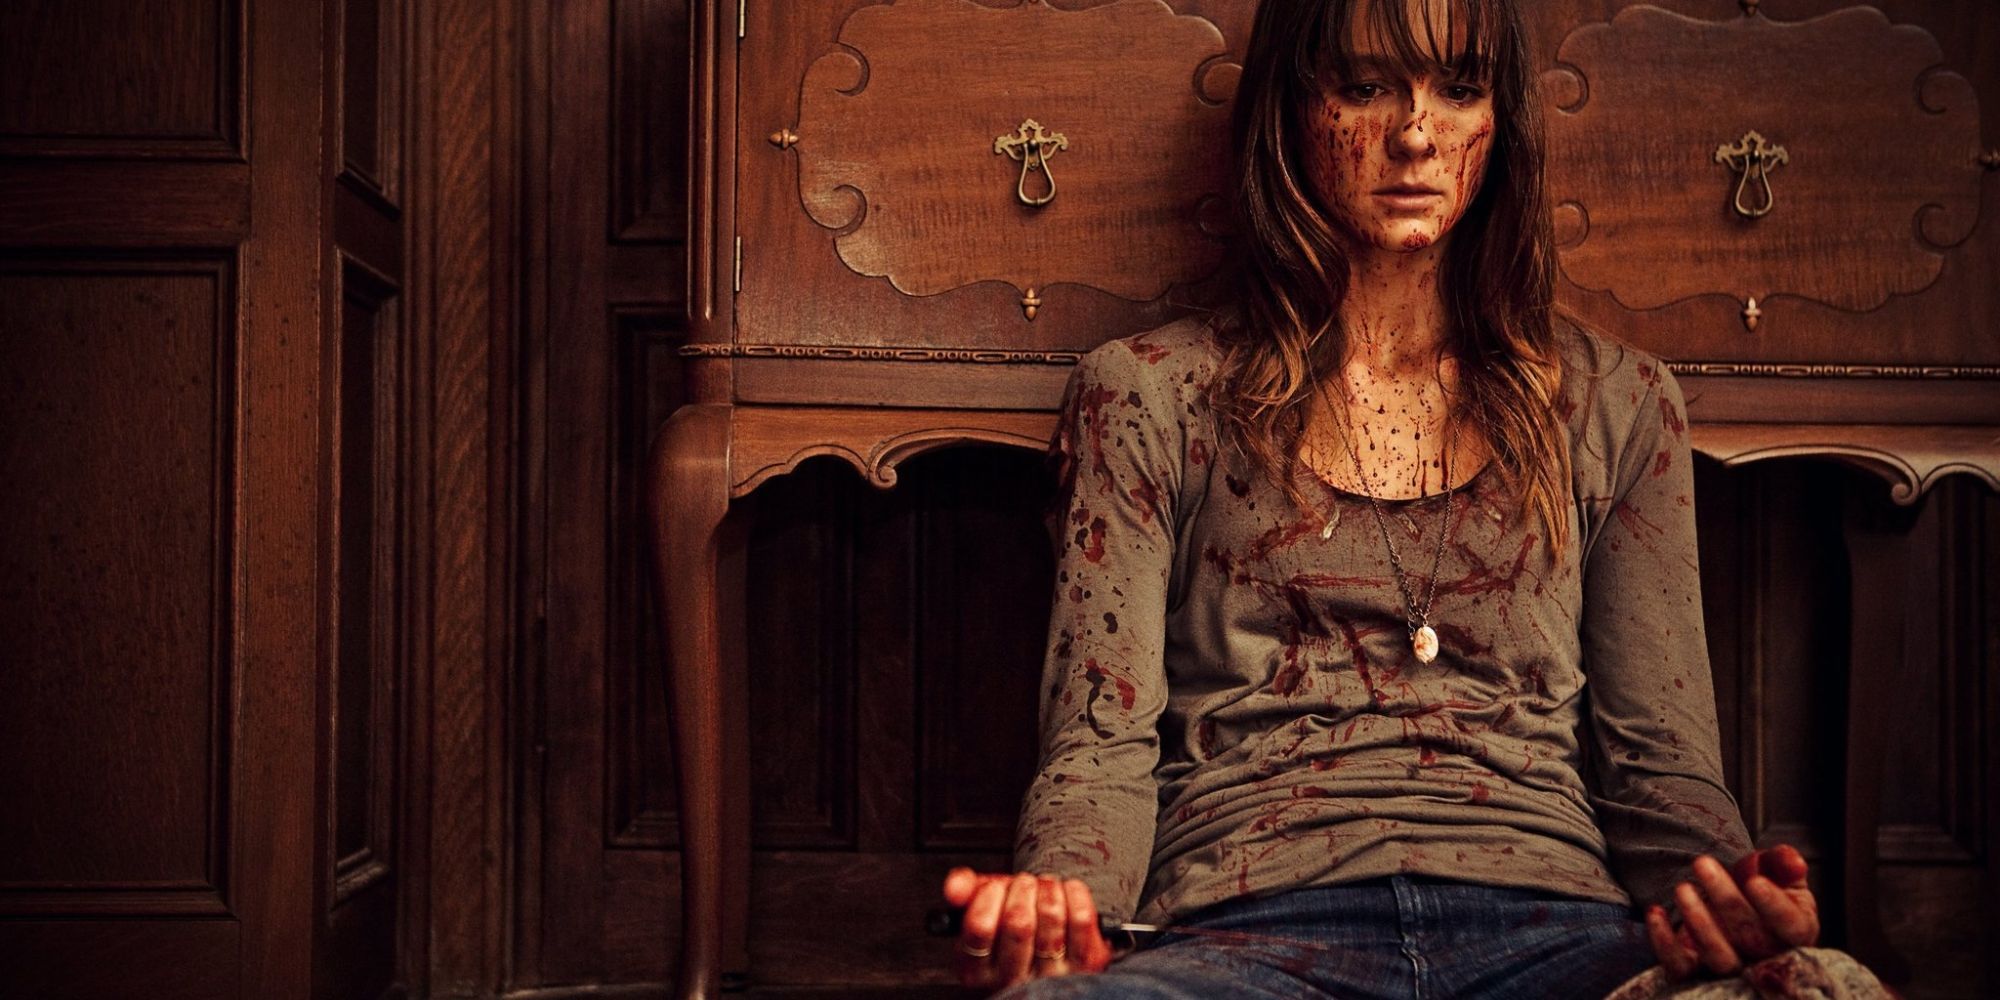 Sharni Vinson as Erin covered in blood sit on the floor in You're Next